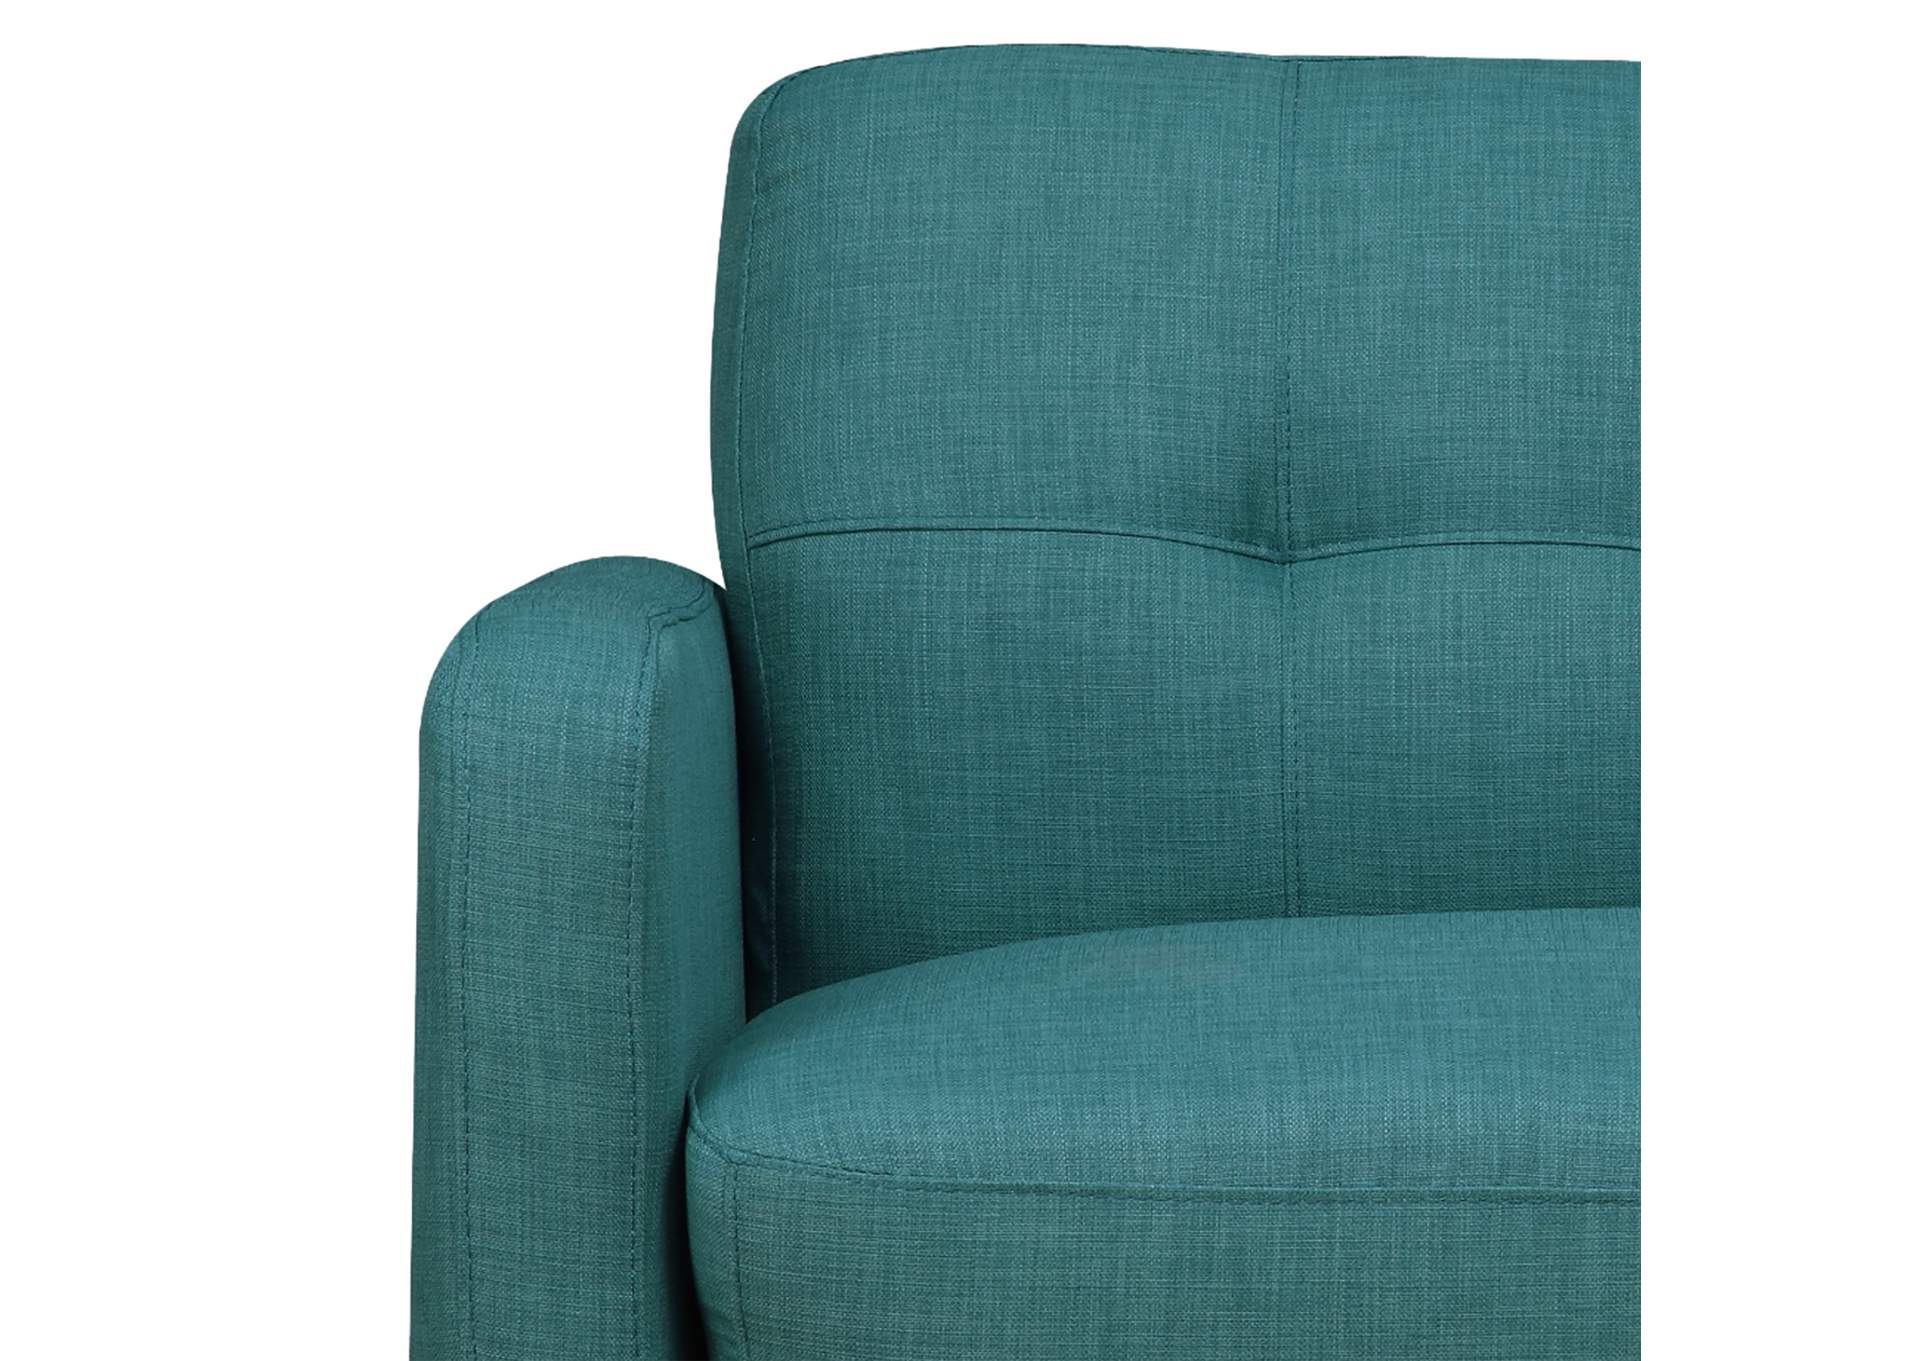 Hadley 4480 Love Seat Heirloom Teal With No Pillow,Elements